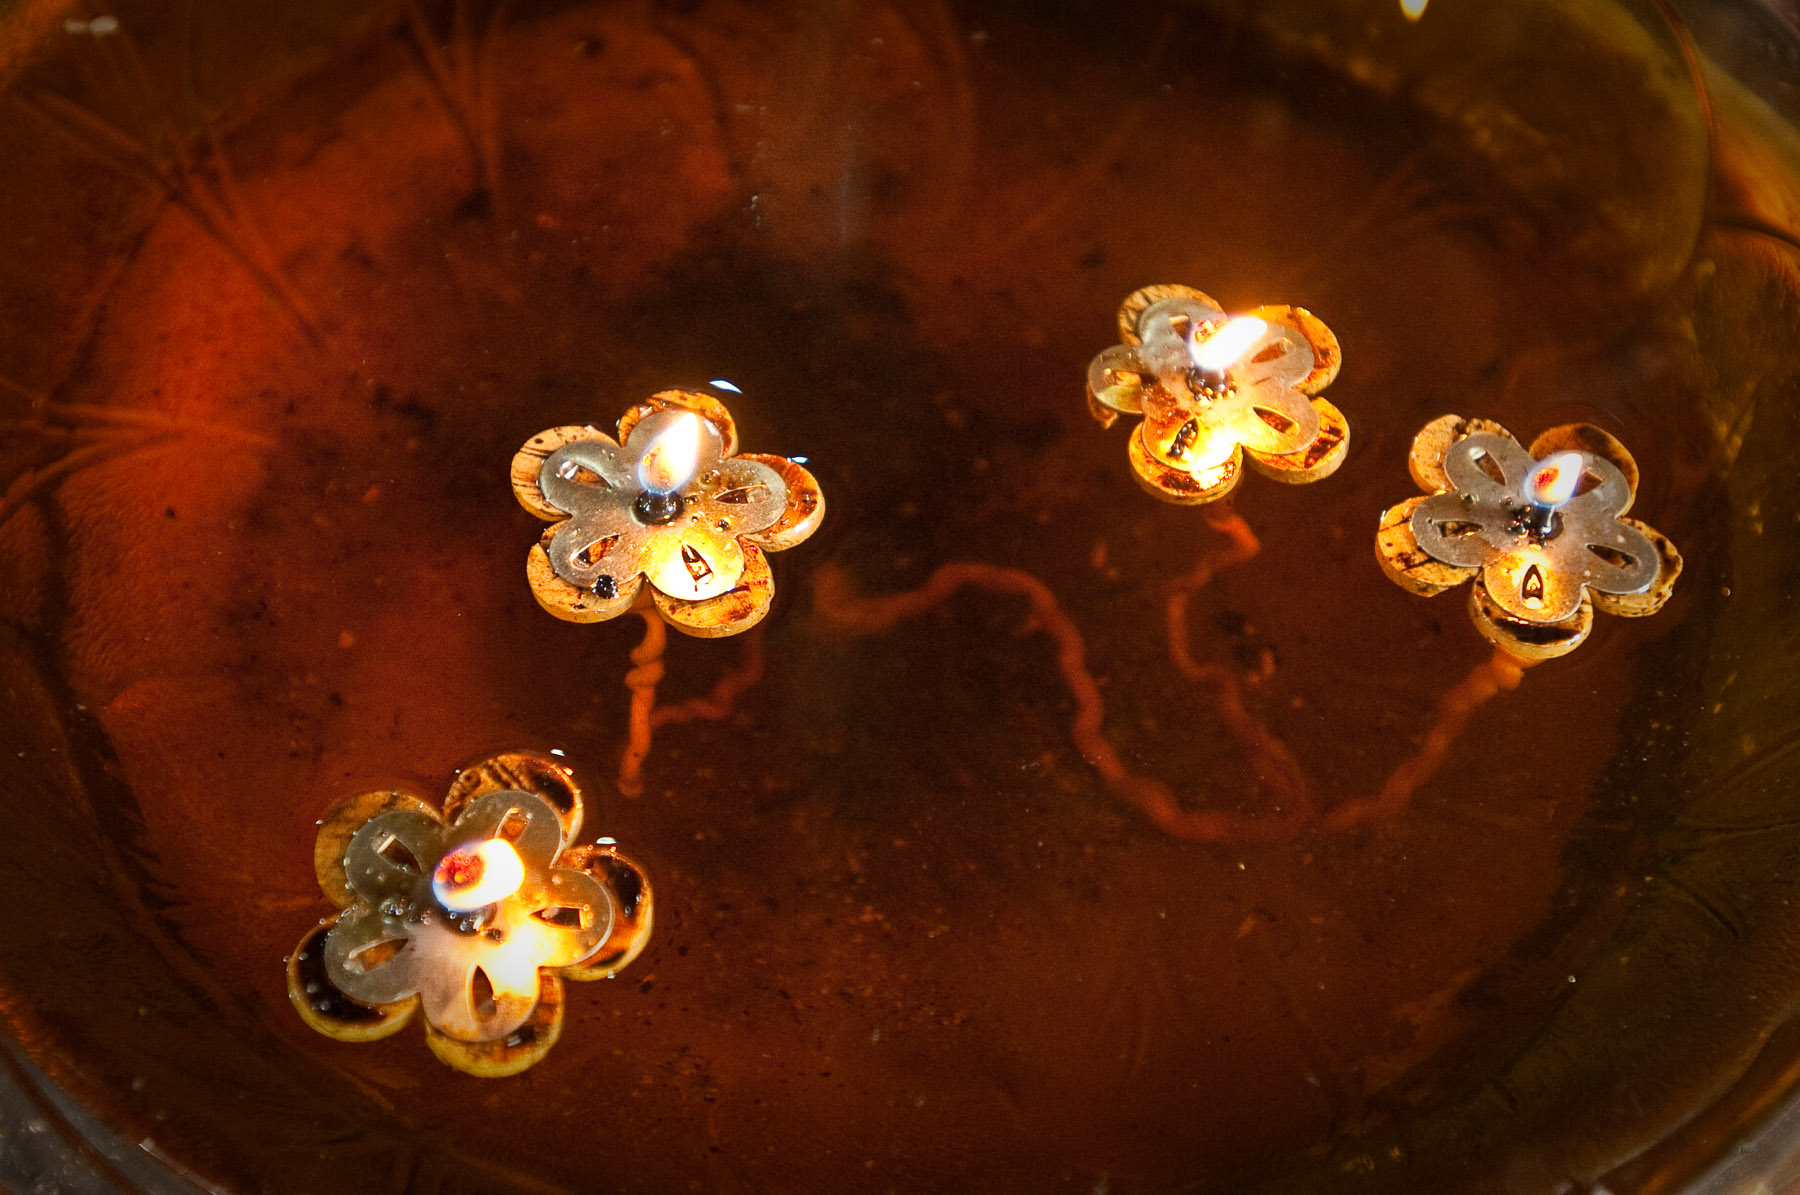 Floating floral candles in Buddhist Temple, Phnom Penh Cambodia.